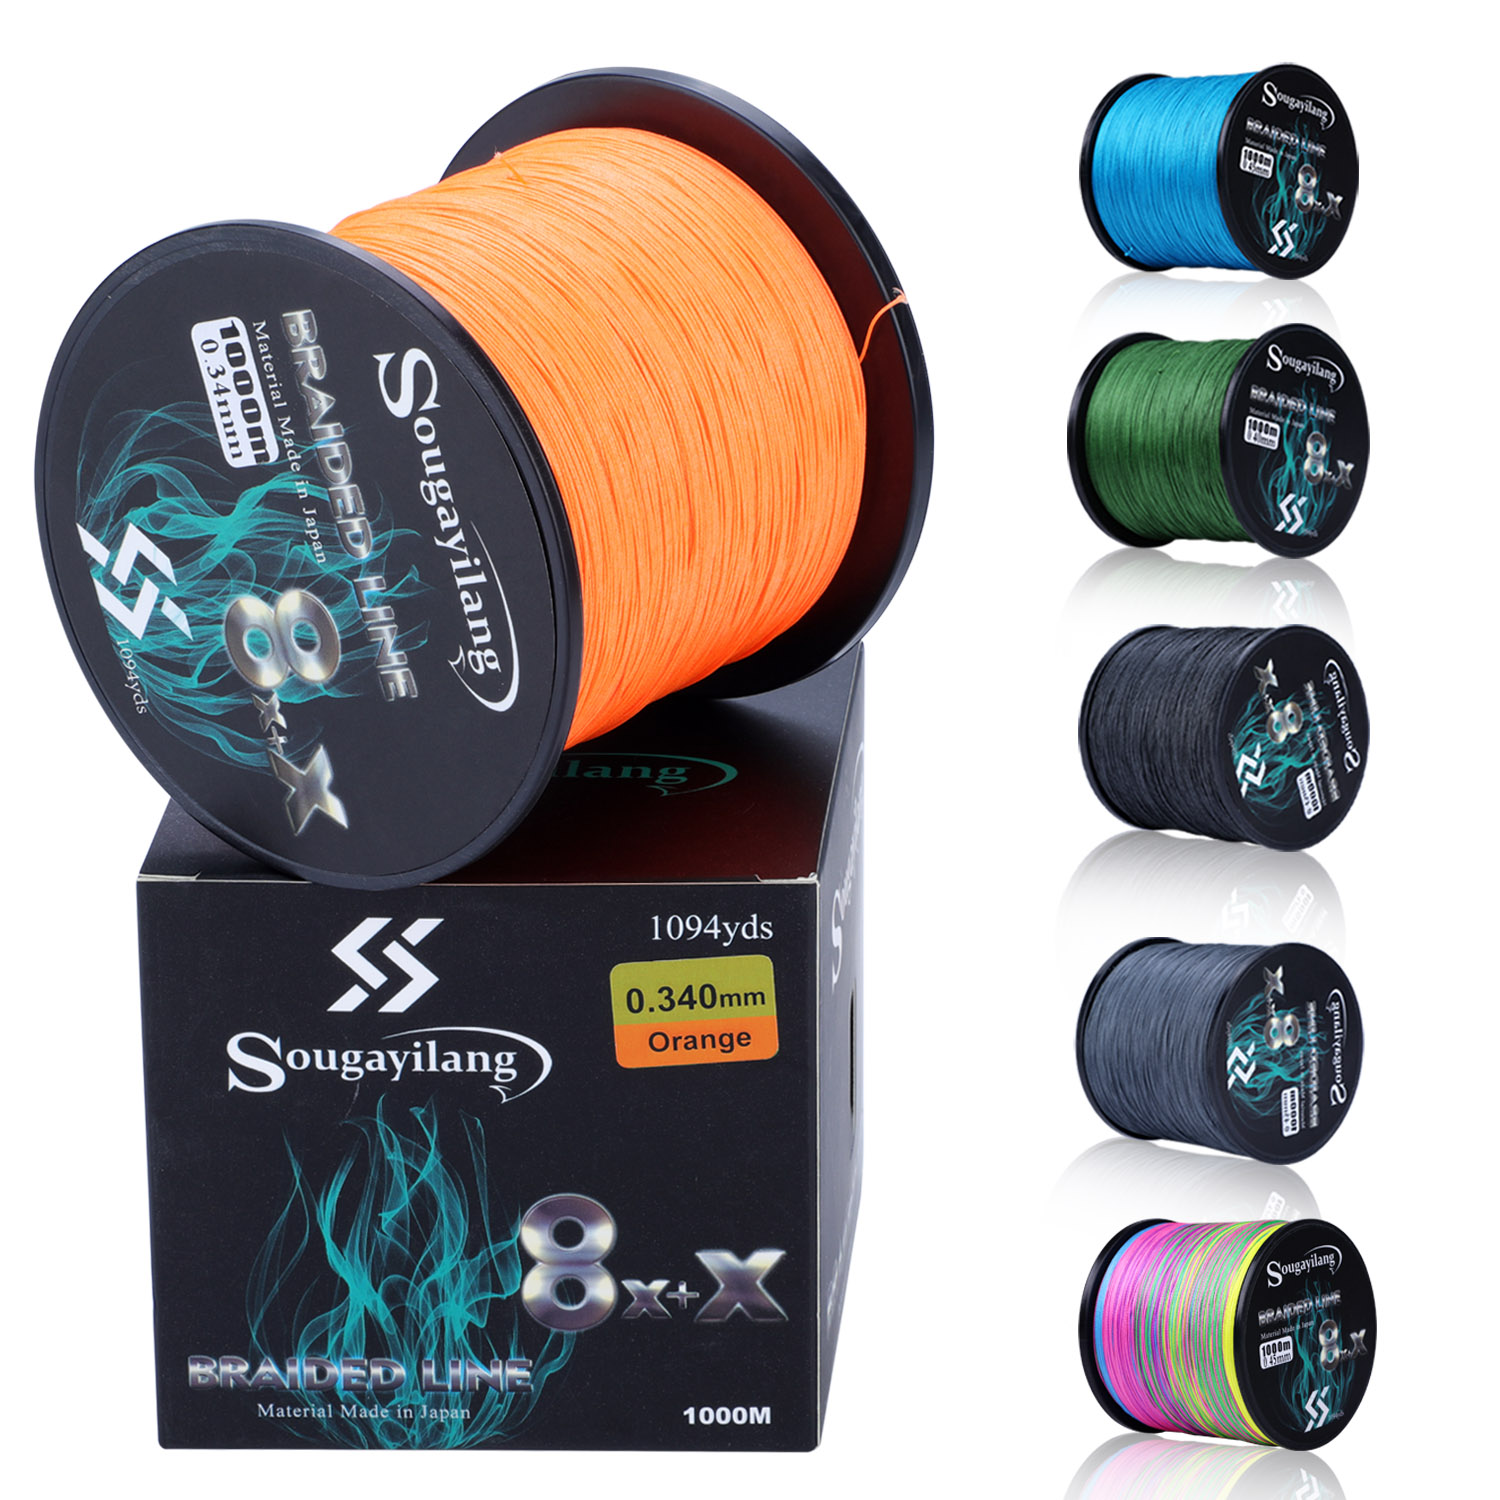 Details about   Strong Fishing Line 4/9 Strands Multifilament Anti-Bite Braided Tool 300m 500m 